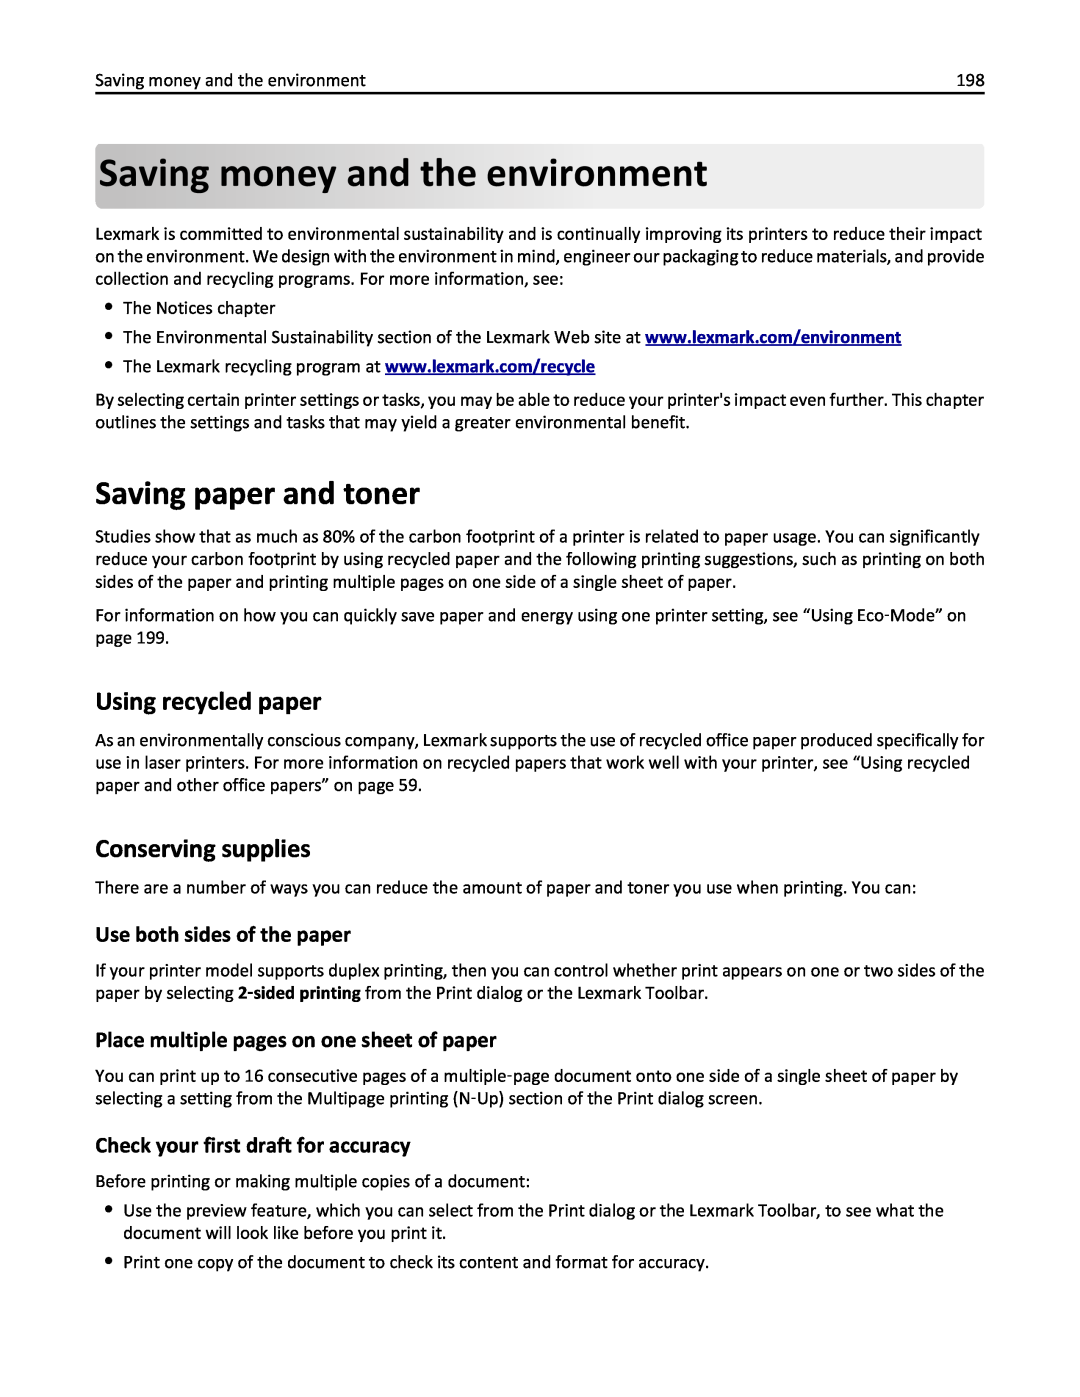 Lexmark 436 manual Savingmoney andthe environment, Saving paper and toner, Using recycled paper, Conserving supplies 